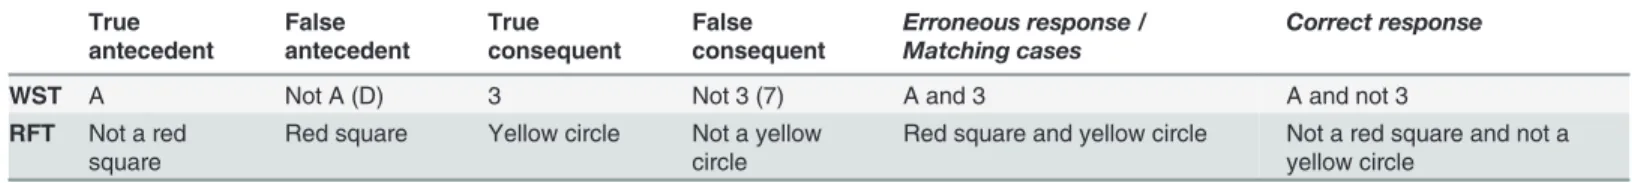 Table 1. For each reasoning task, we present the analysis of the conditional rule, the classical erroneous response that matches with the elements presented in the conditional rule, and the expected logical response that partially matches (WST) or not (RFT